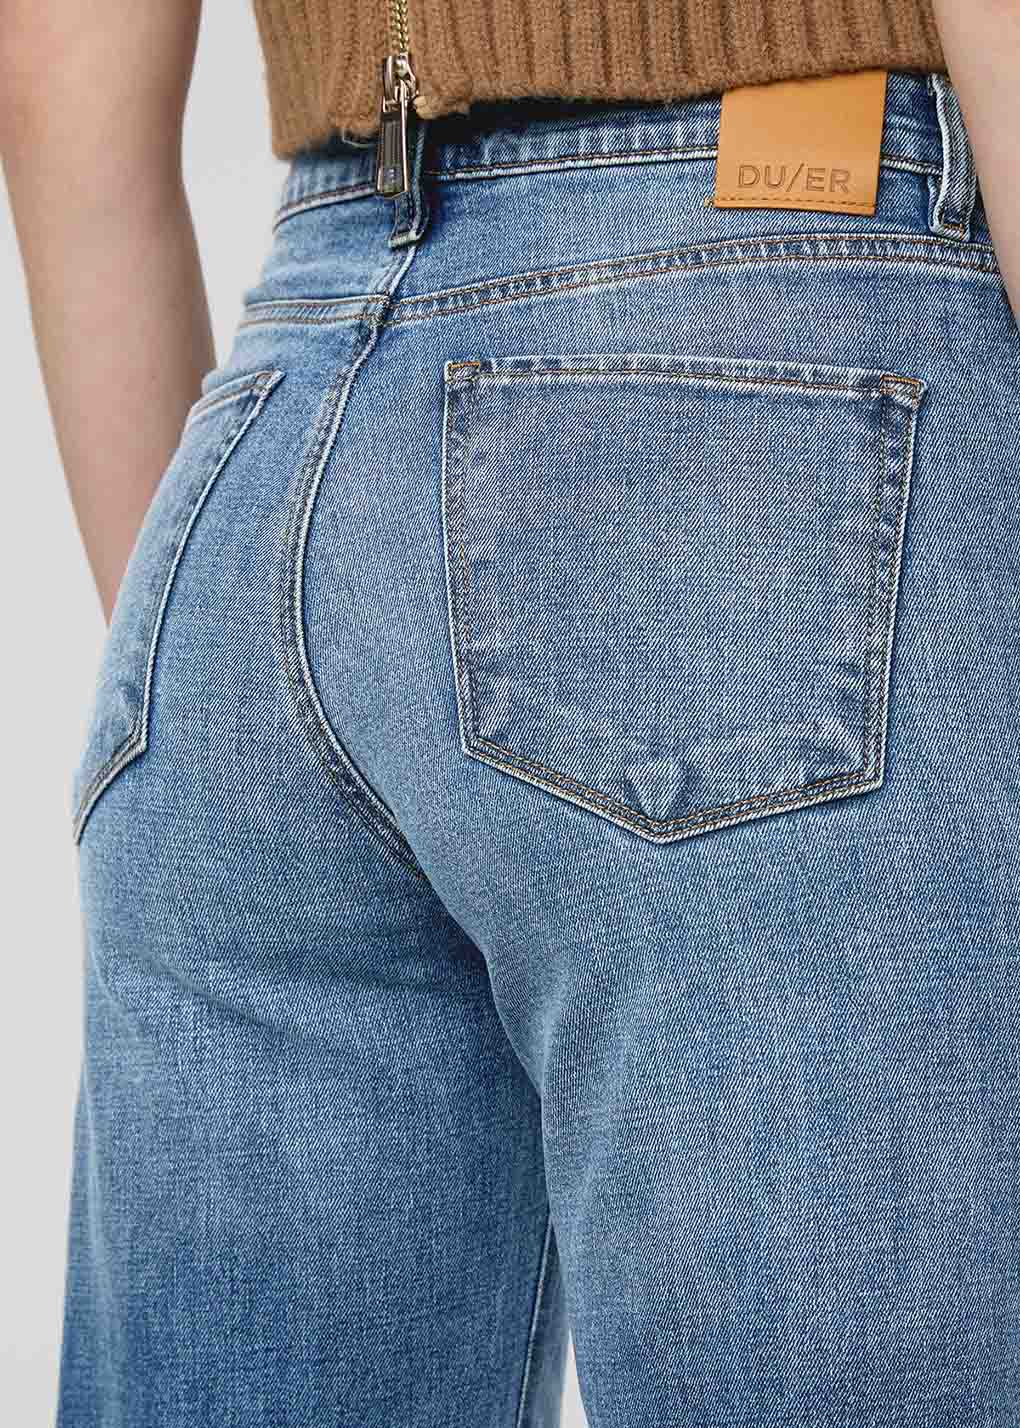 womens high rise wide leg blue jeans back pocket and waistband detail